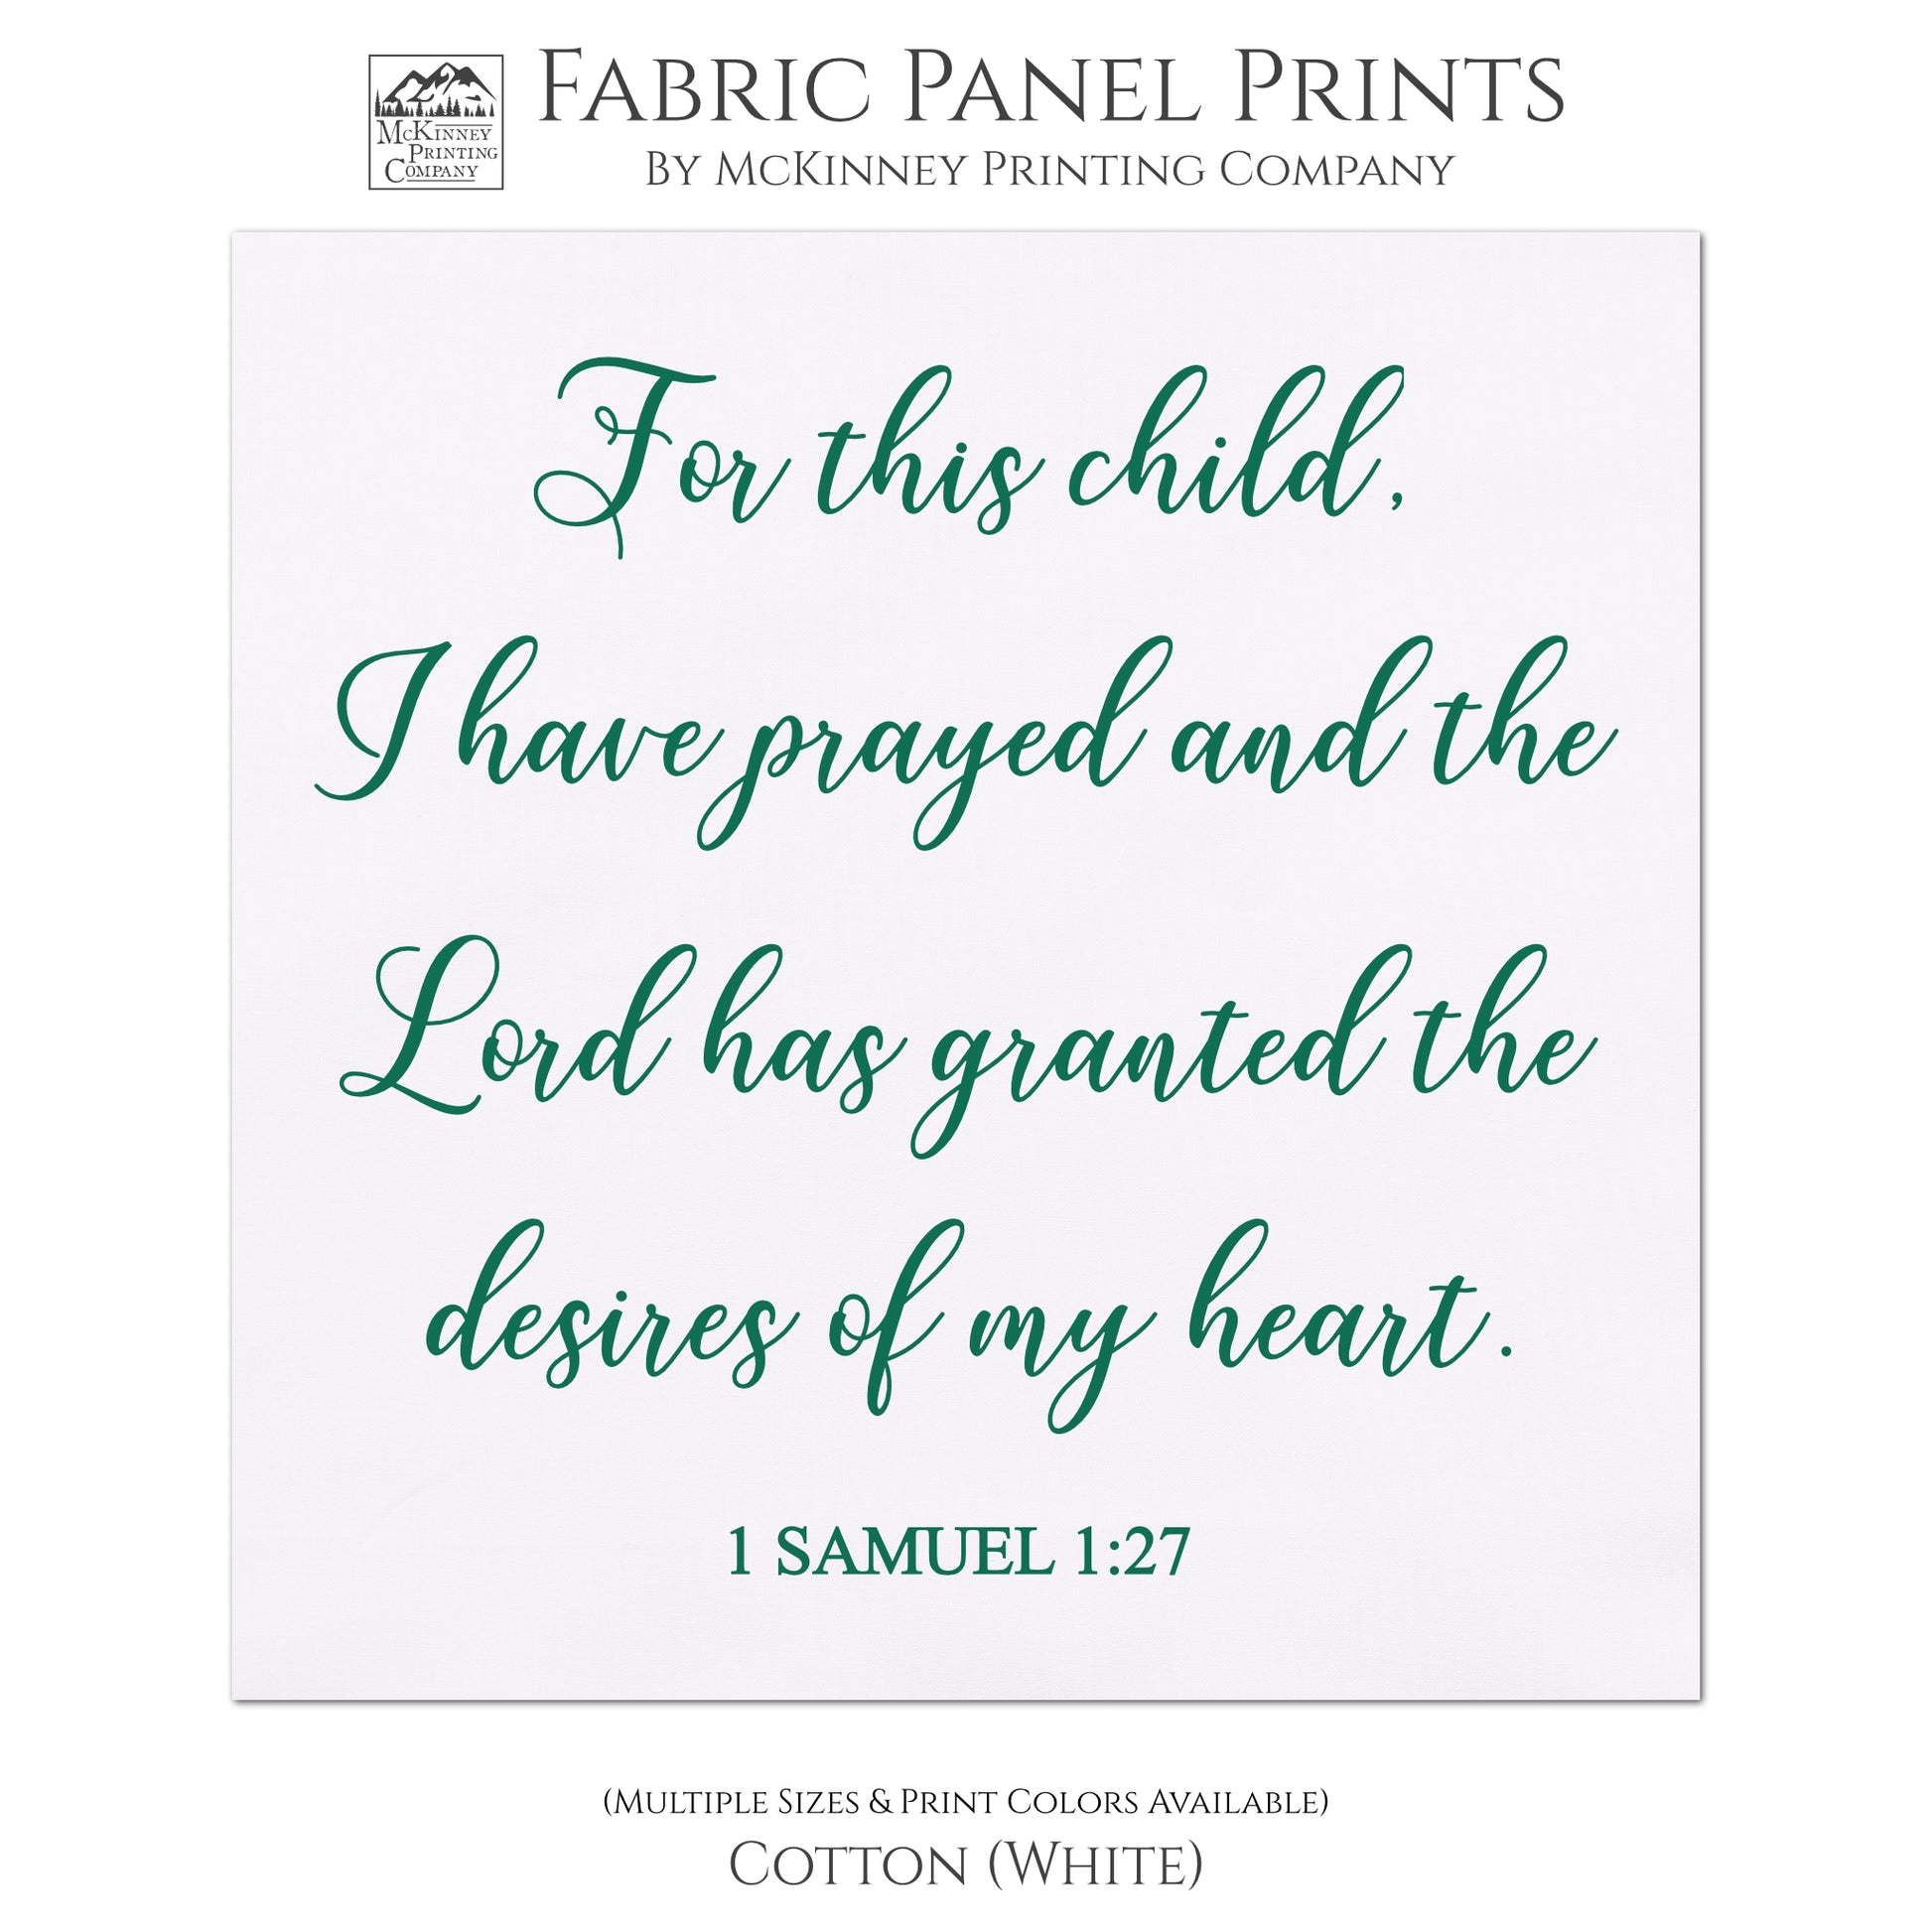 For This Child I Have Prayed, and the Lord has granted the desires of my heart - 1 Samuel 1:27, Bible Verse, Scripture Fabric - Cotton, White